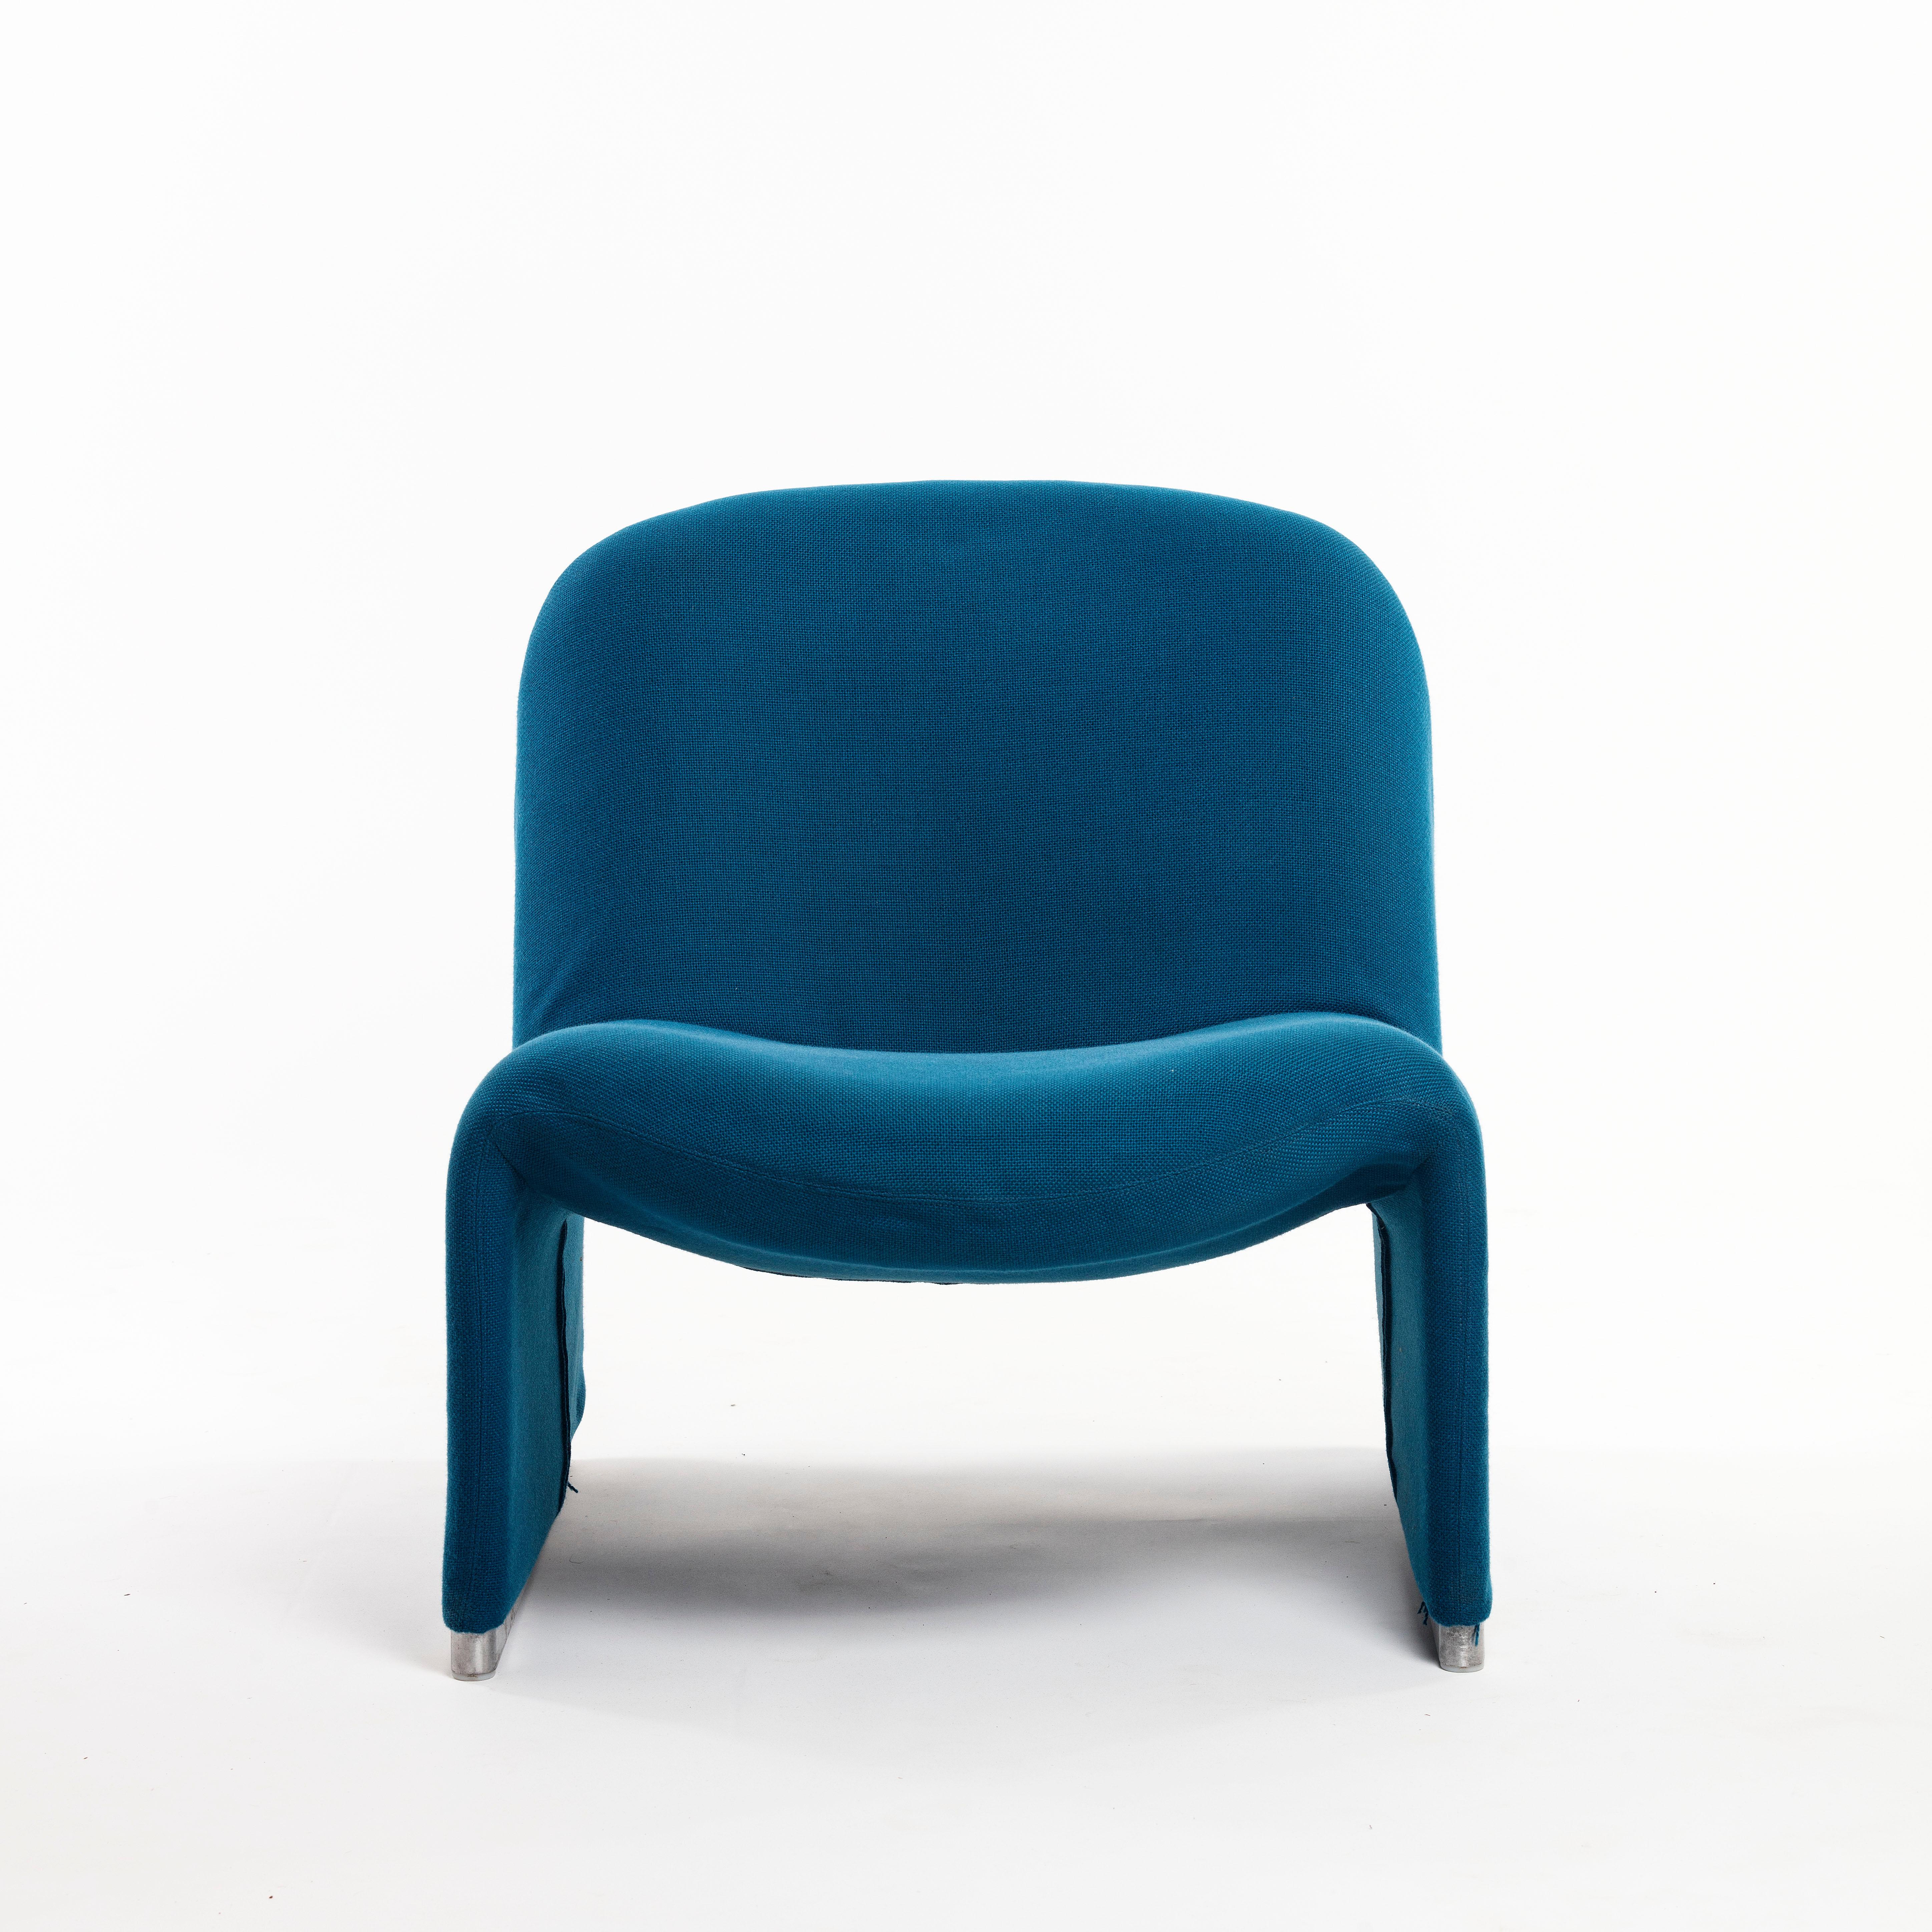 Giancarlo Piretti Iconic Alki Lounge Chair in Original Blue Upholstery Castelli In Good Condition For Sale In Santa Gertrudis, Baleares